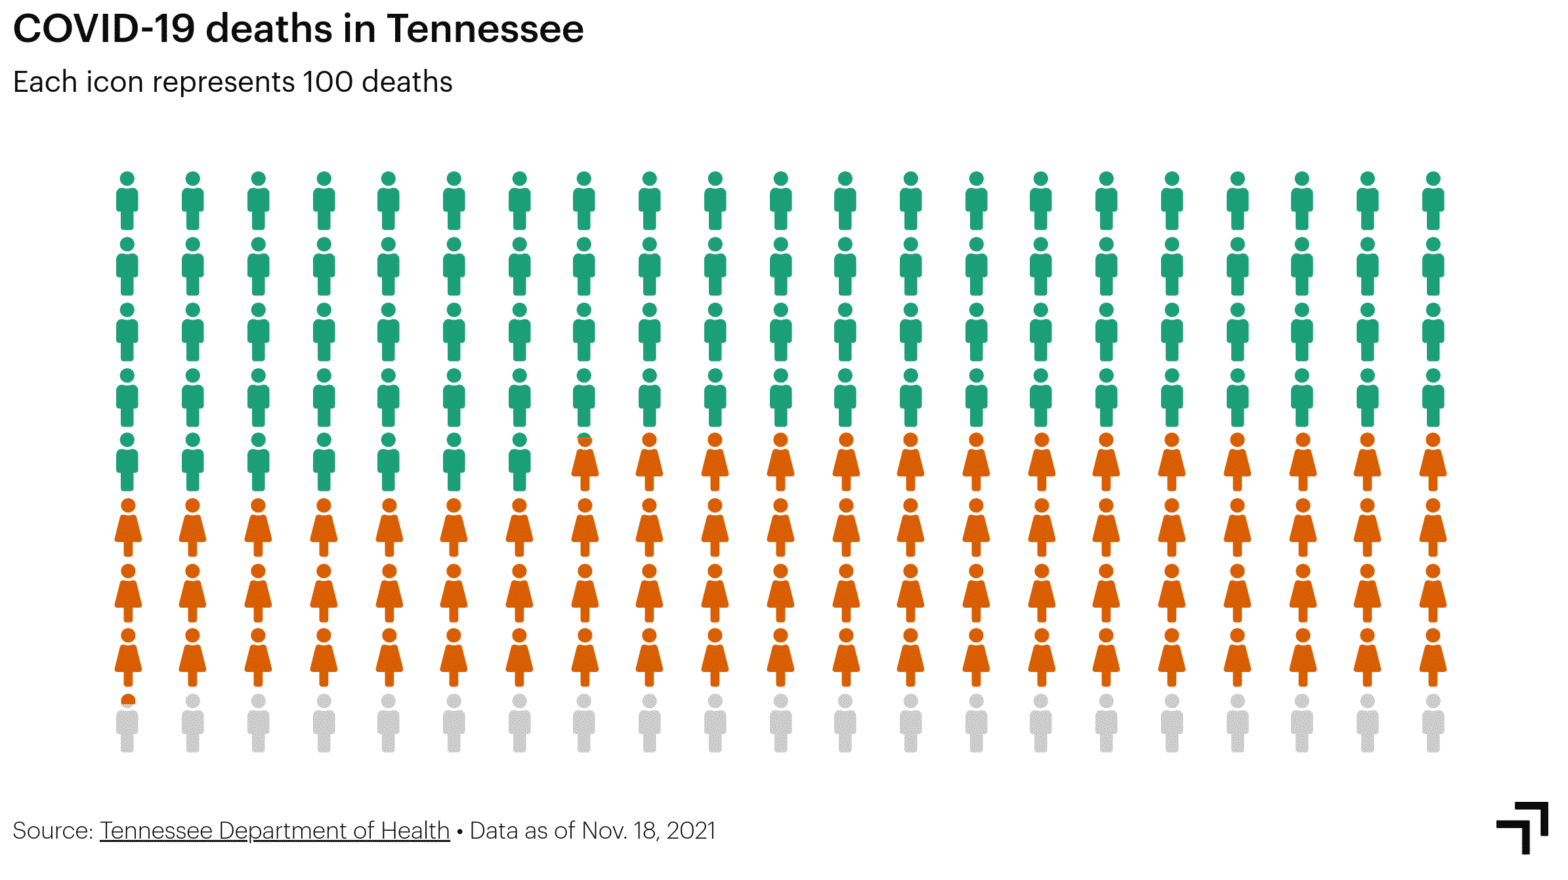 Tennessee Department of Health data as of Nov. 18, 2021. Graphic created with Flourish Studio.